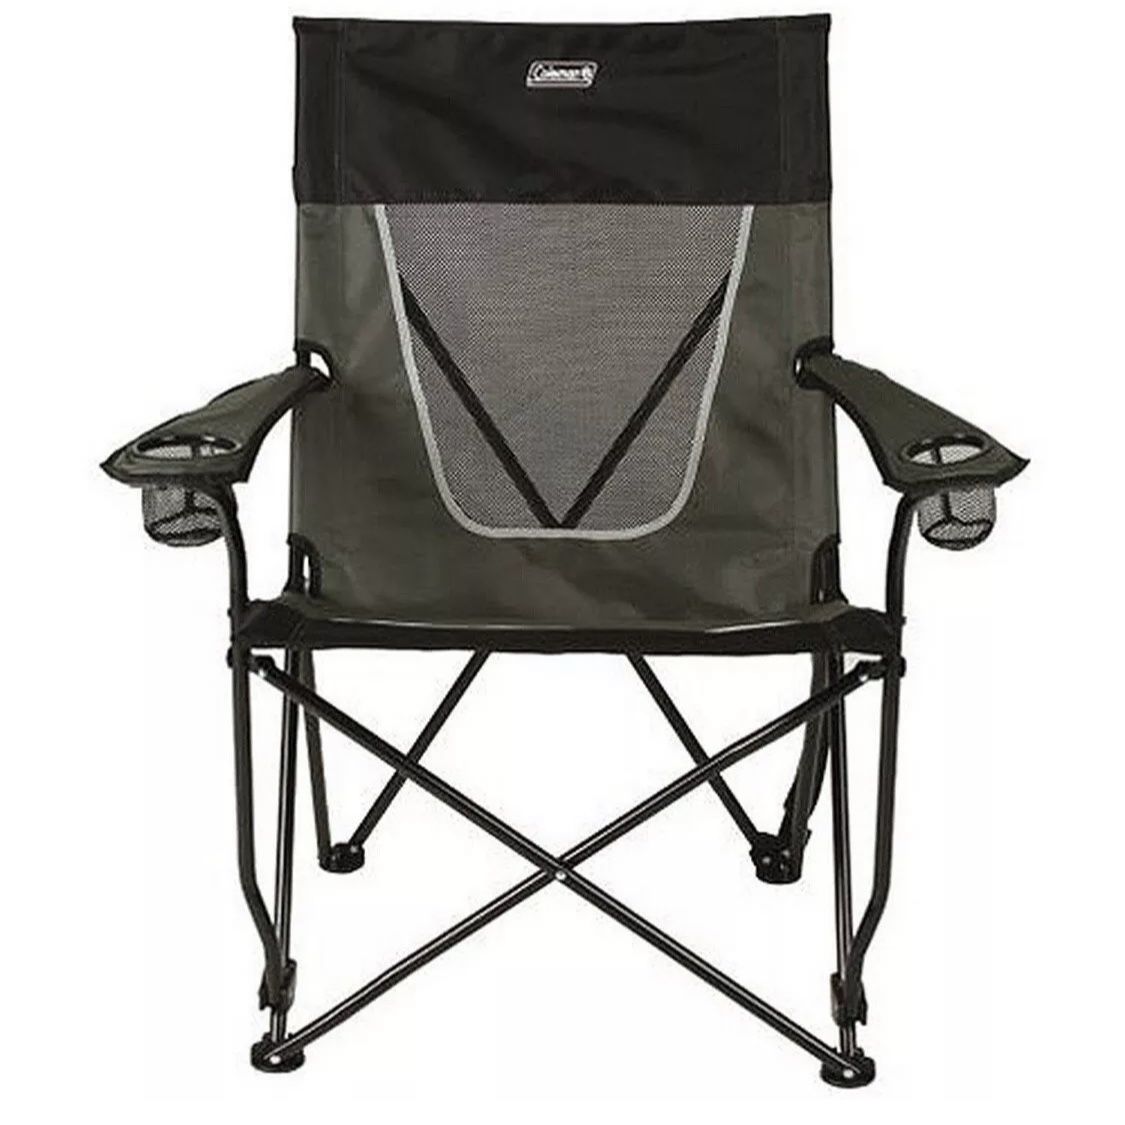 BRAND NEW -2 Coleman XL Chairs